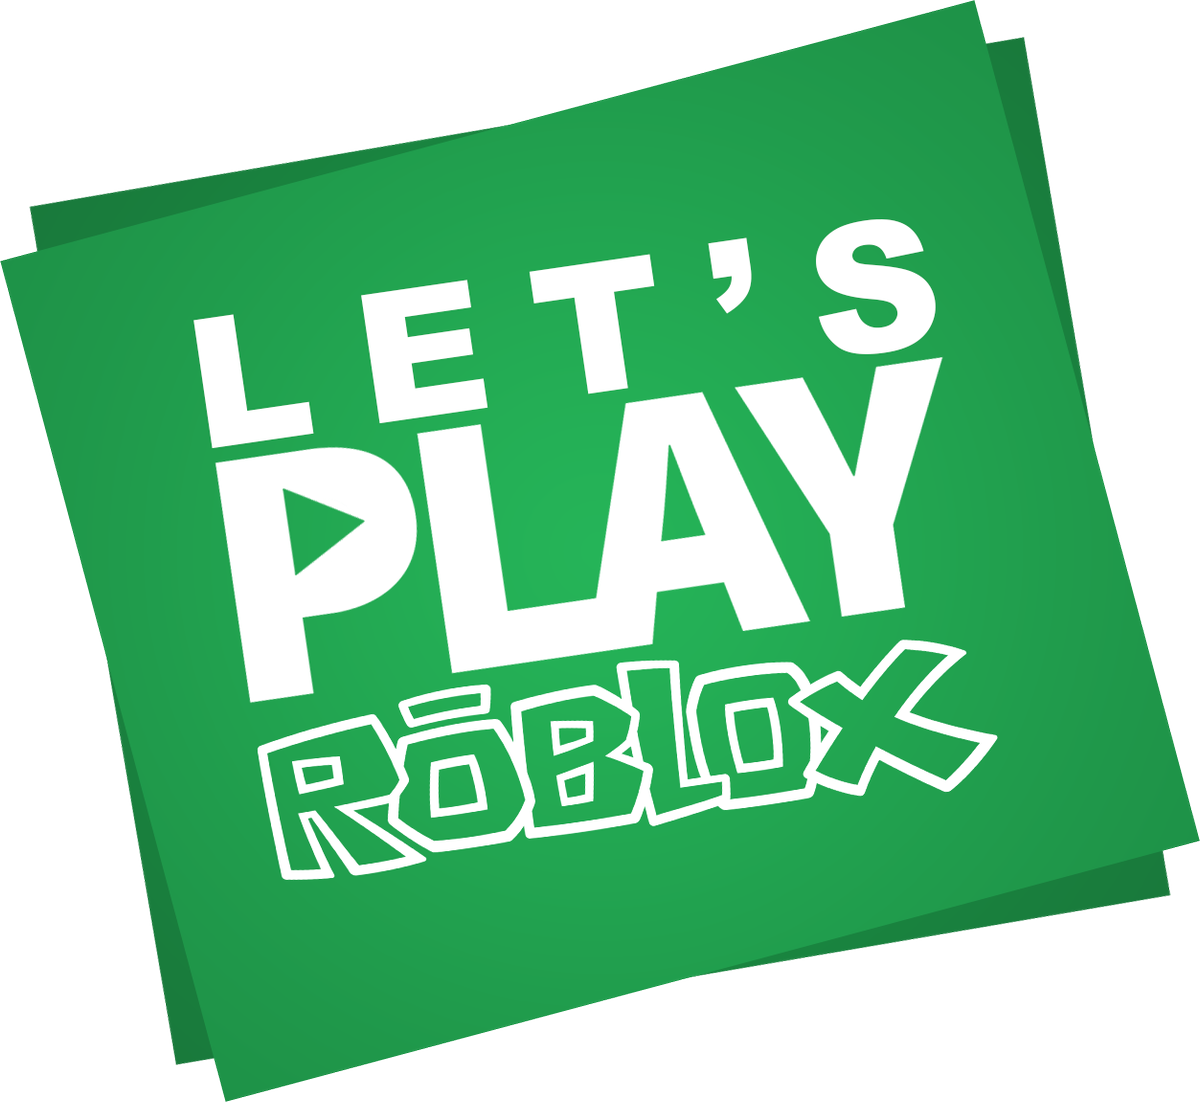 Roblox On Twitter Spin The Wheel And Get Ready To Play On This Week S Letsplayroblox We Compete For Game Show Champion 2pm Pst Https T Co Cn5od8dqm0 Https T Co 4r39gymvin - miss play com roblox